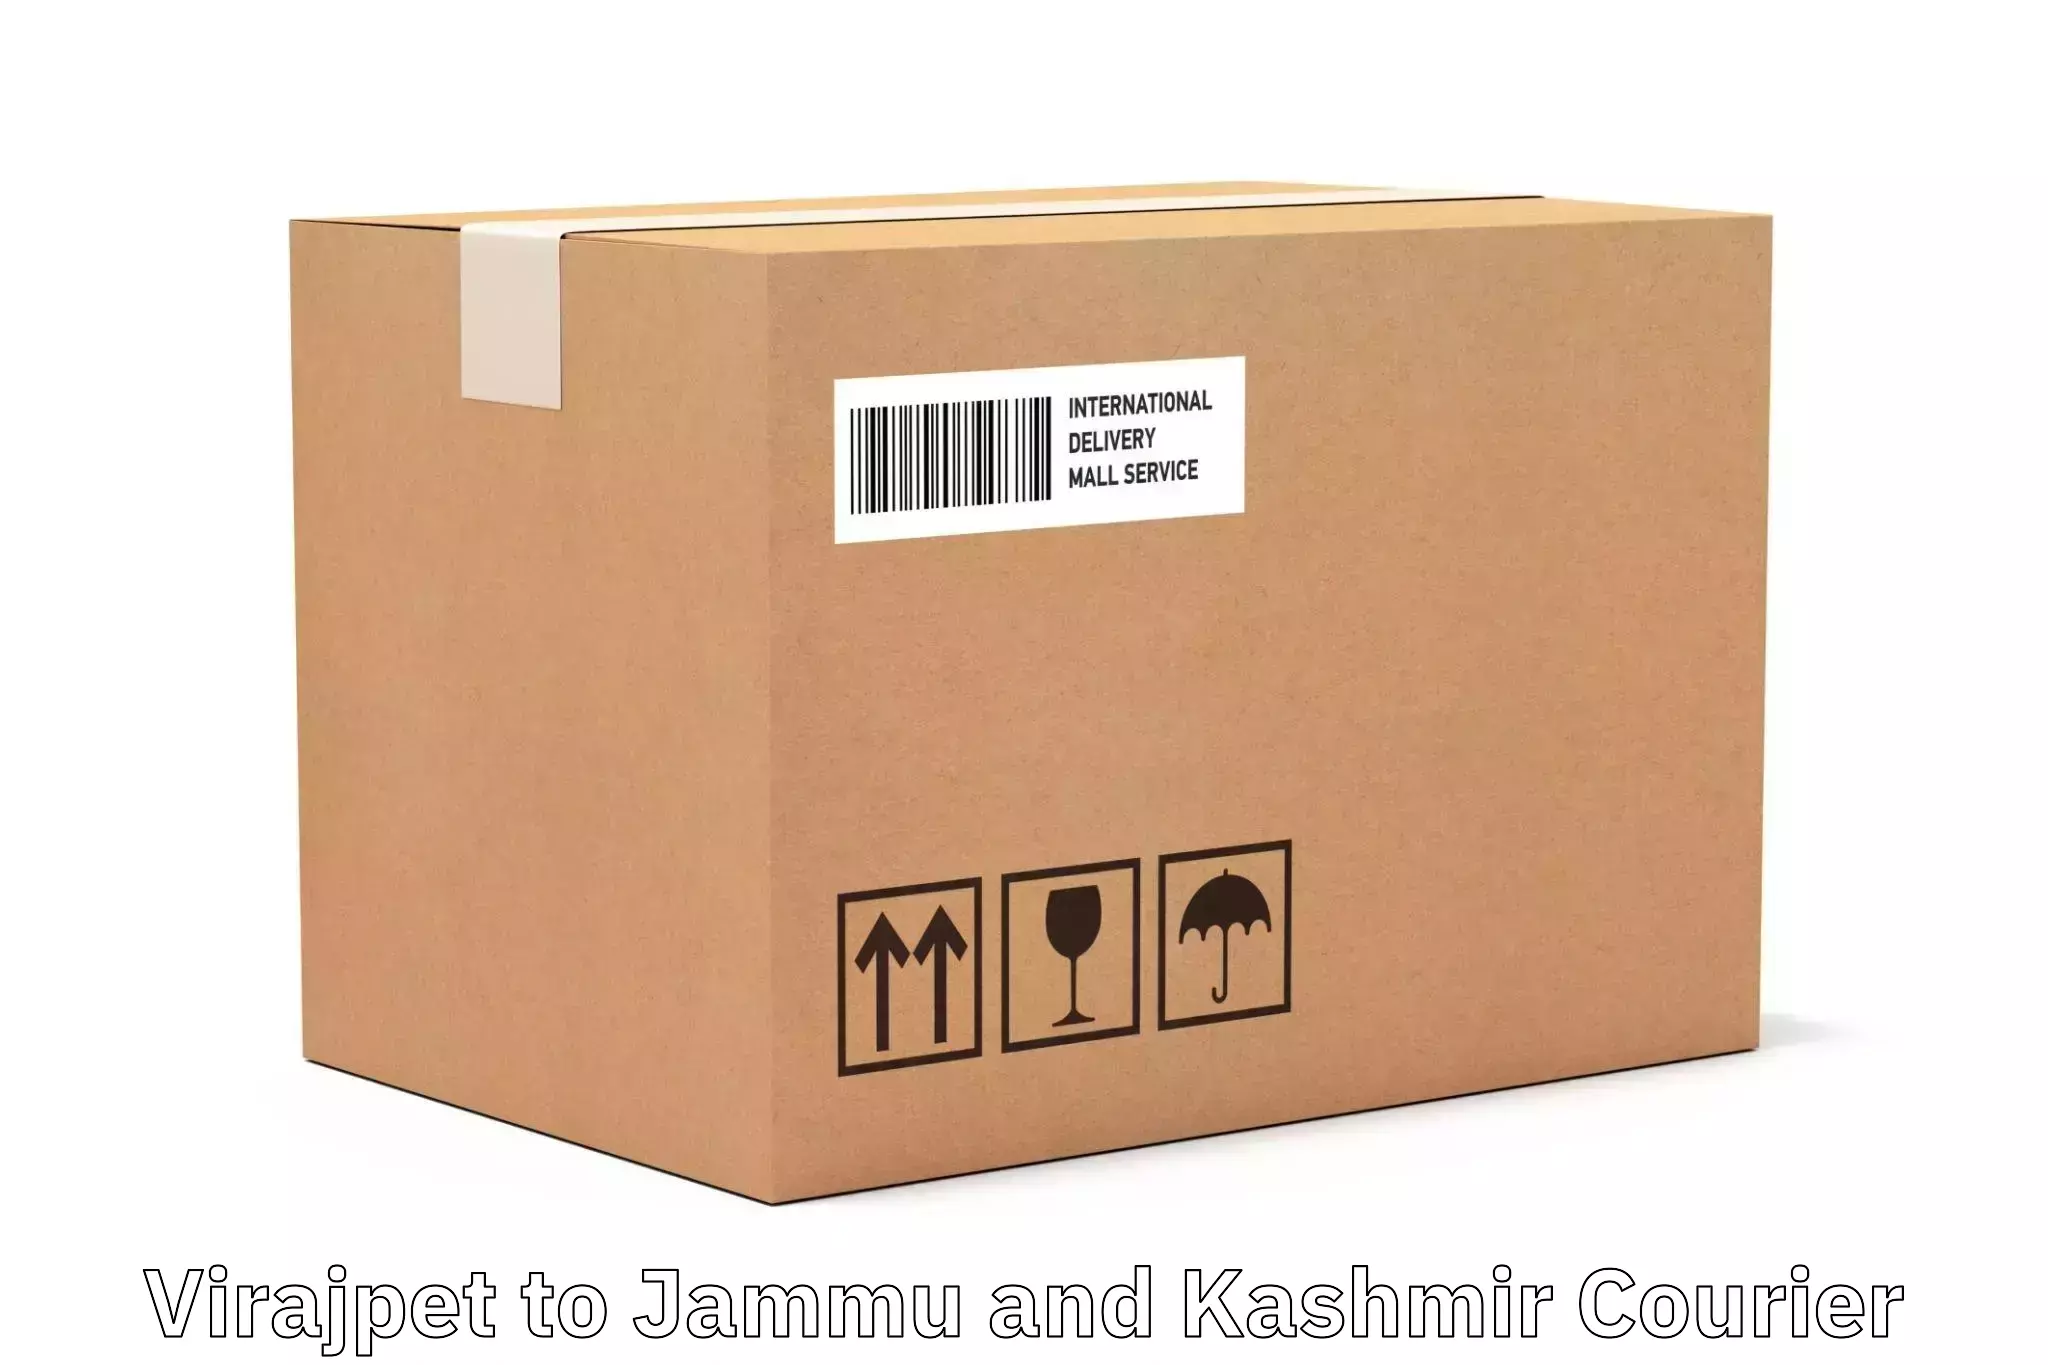 Express package services in Virajpet to Jammu and Kashmir